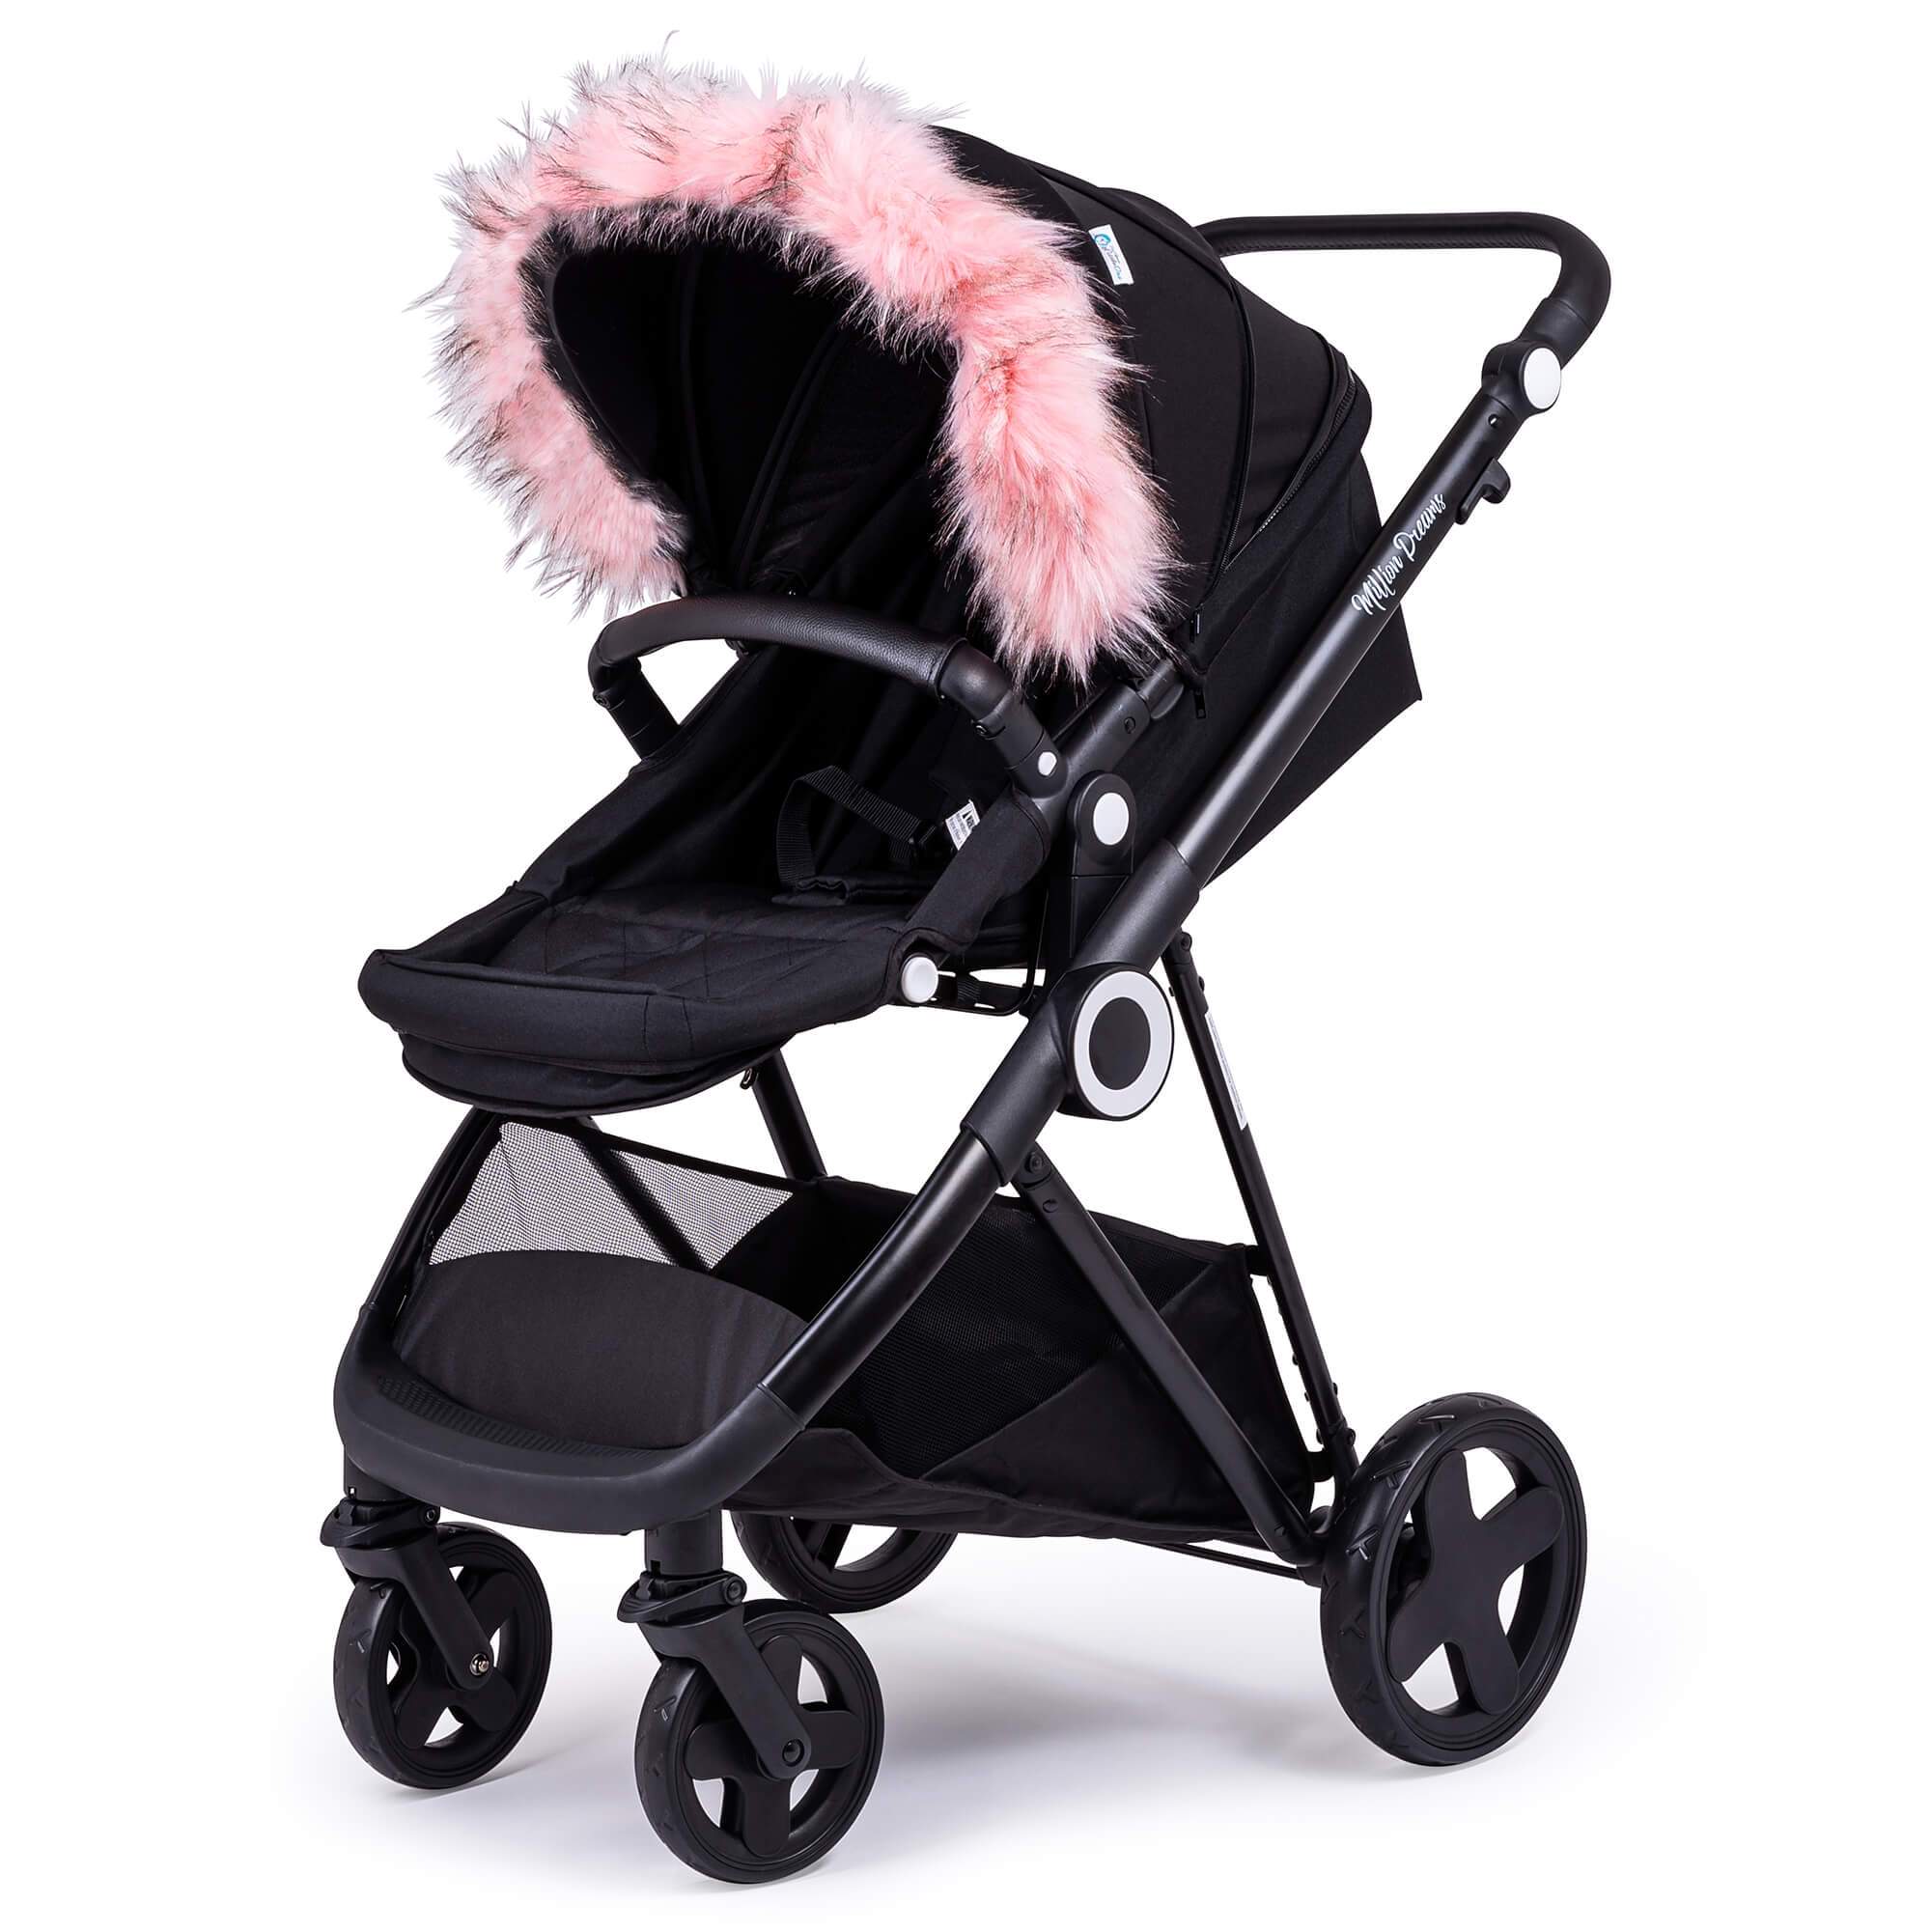 Pram Fur Hood Trim Attachment for Pushchair Compatible with Hesba - For Your Little One